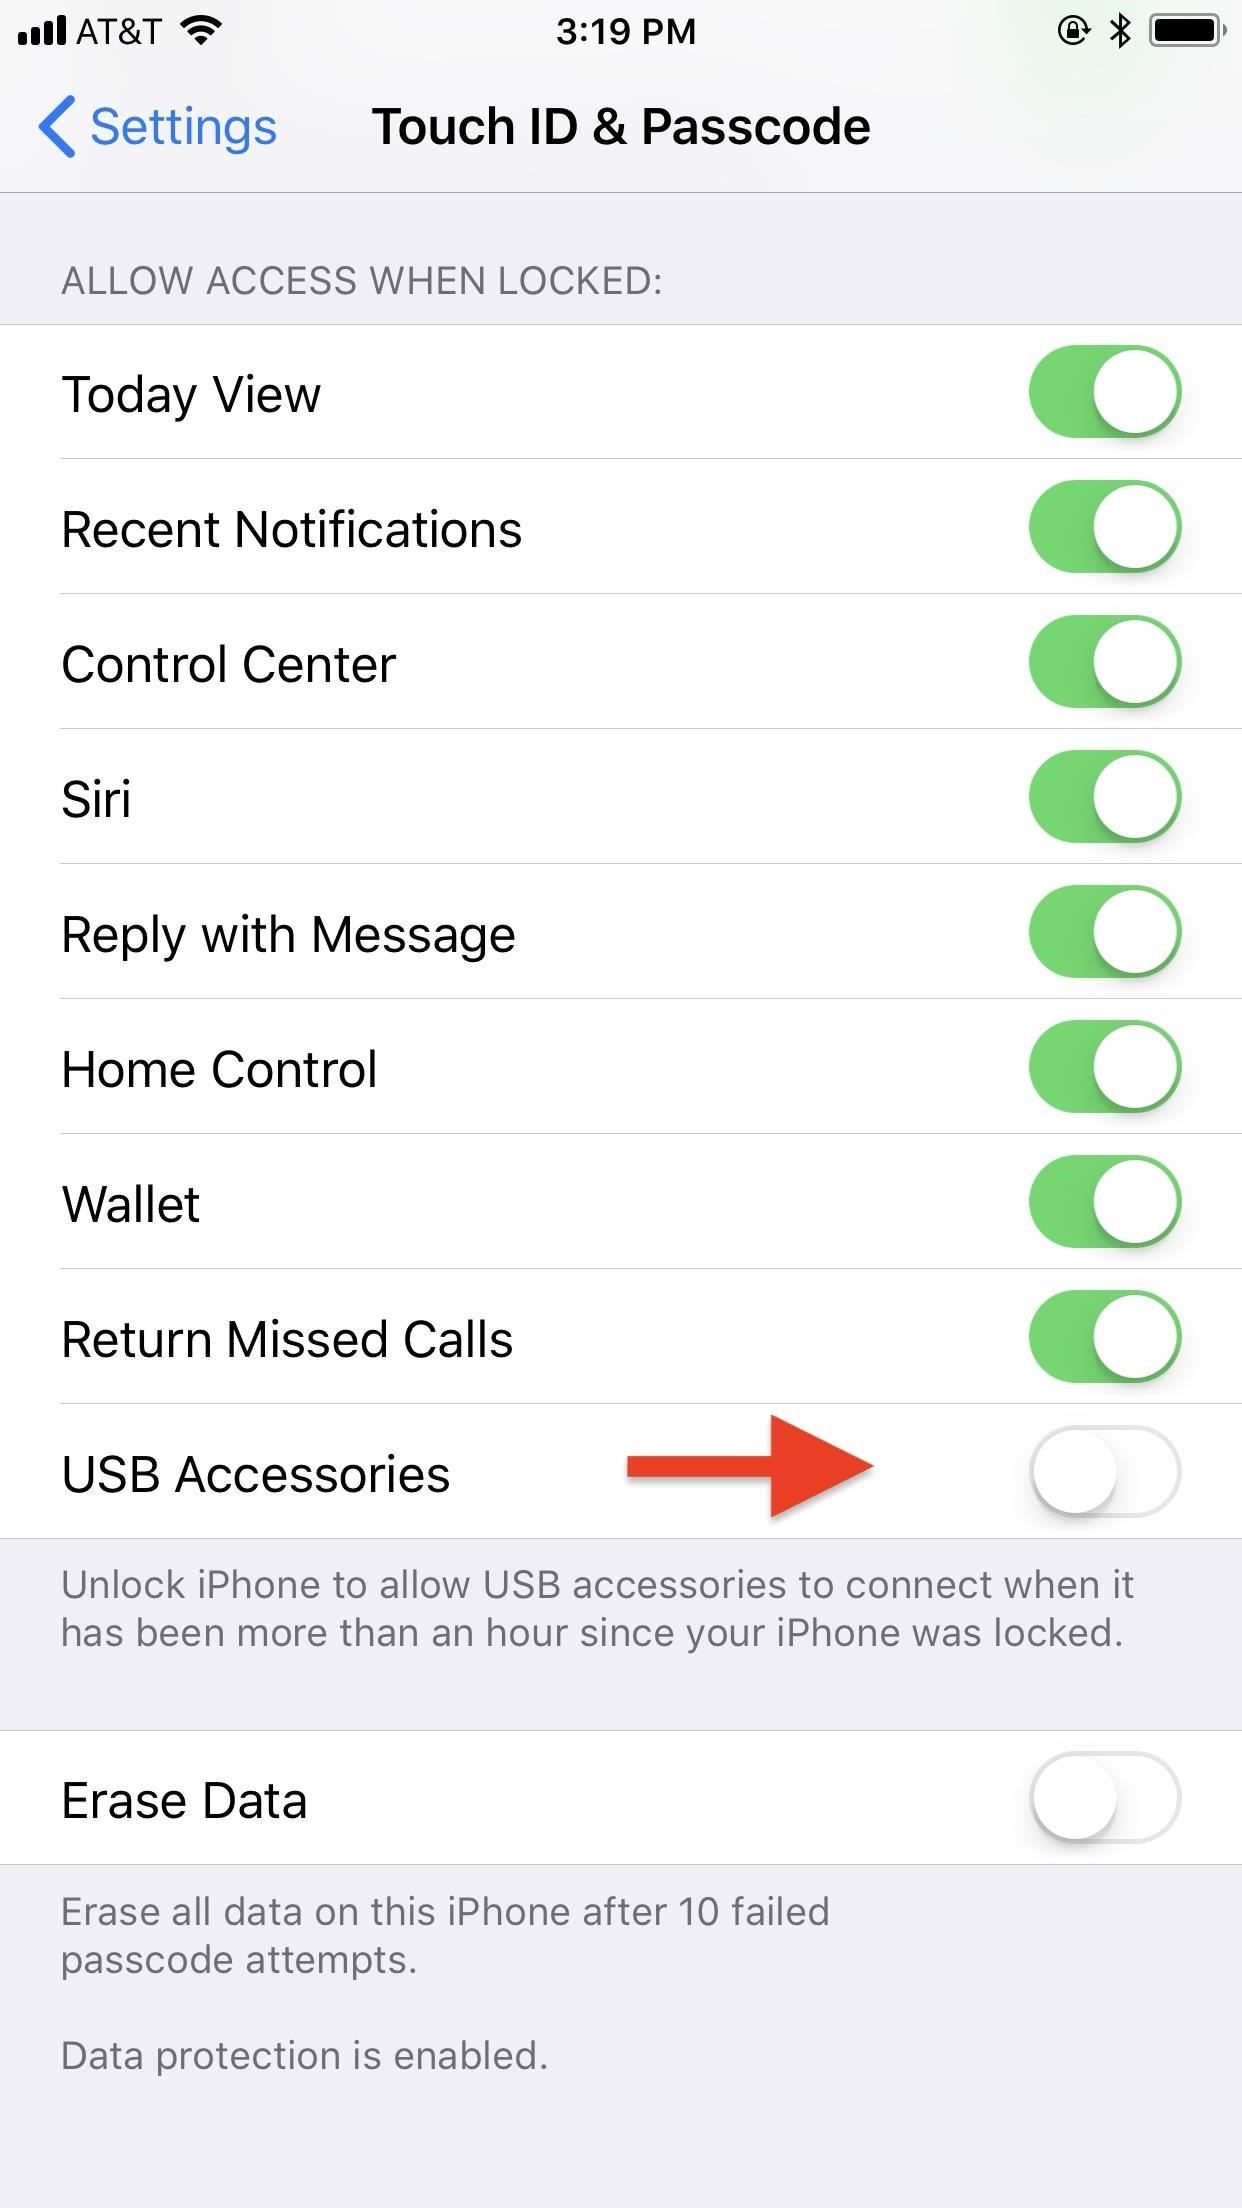 Just Released: iOS 11.4.1 for iPhones Includes More Secure USB Restricted Mode, Bug Fixes & Improvements